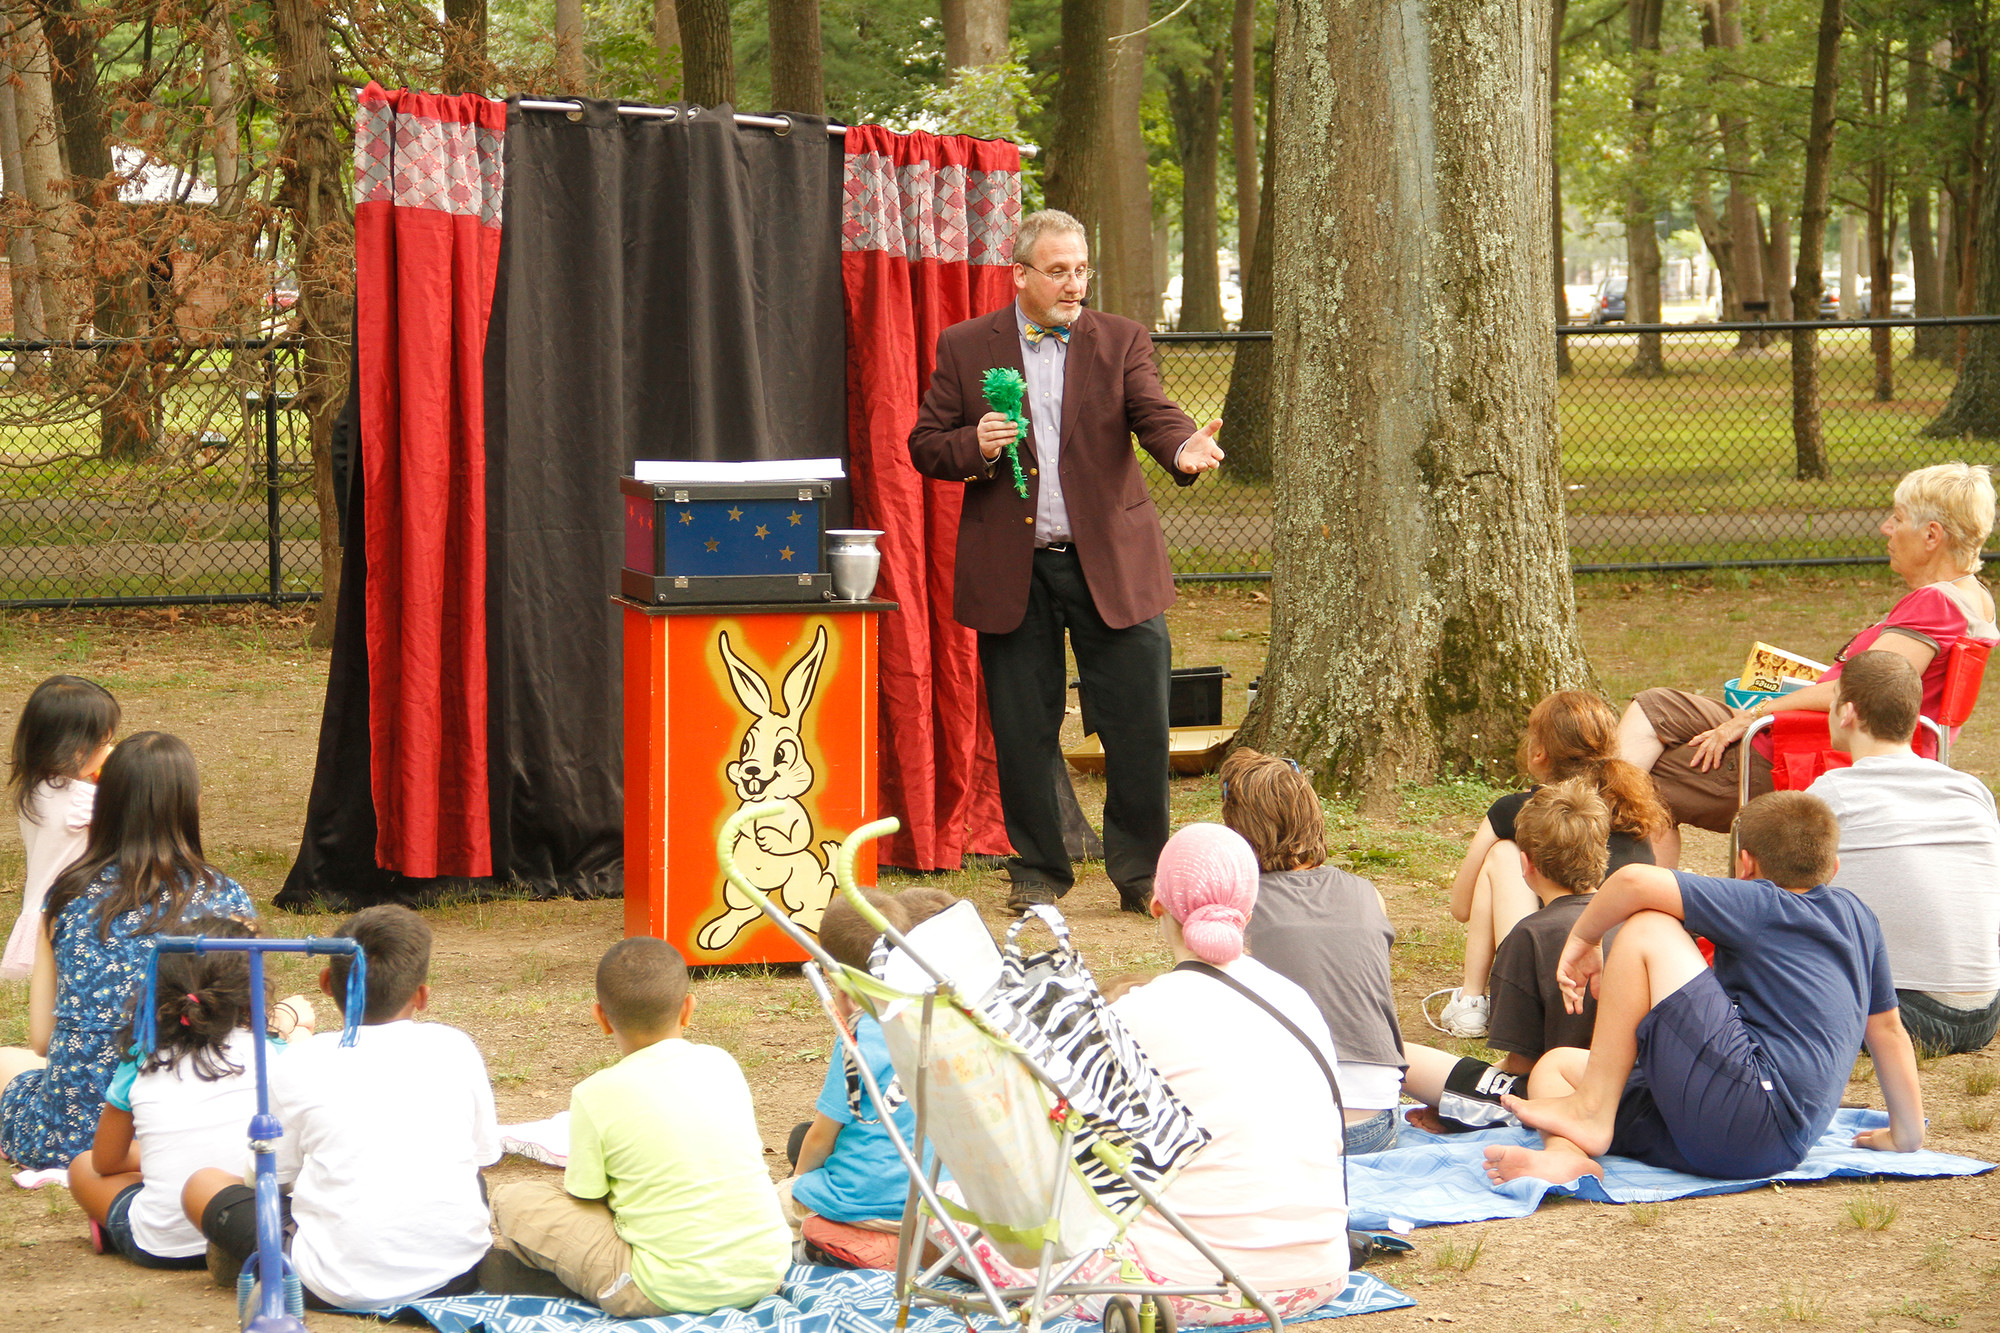 Magician Seth Falley entertained a group of children on July 21 during a free program at the playground.